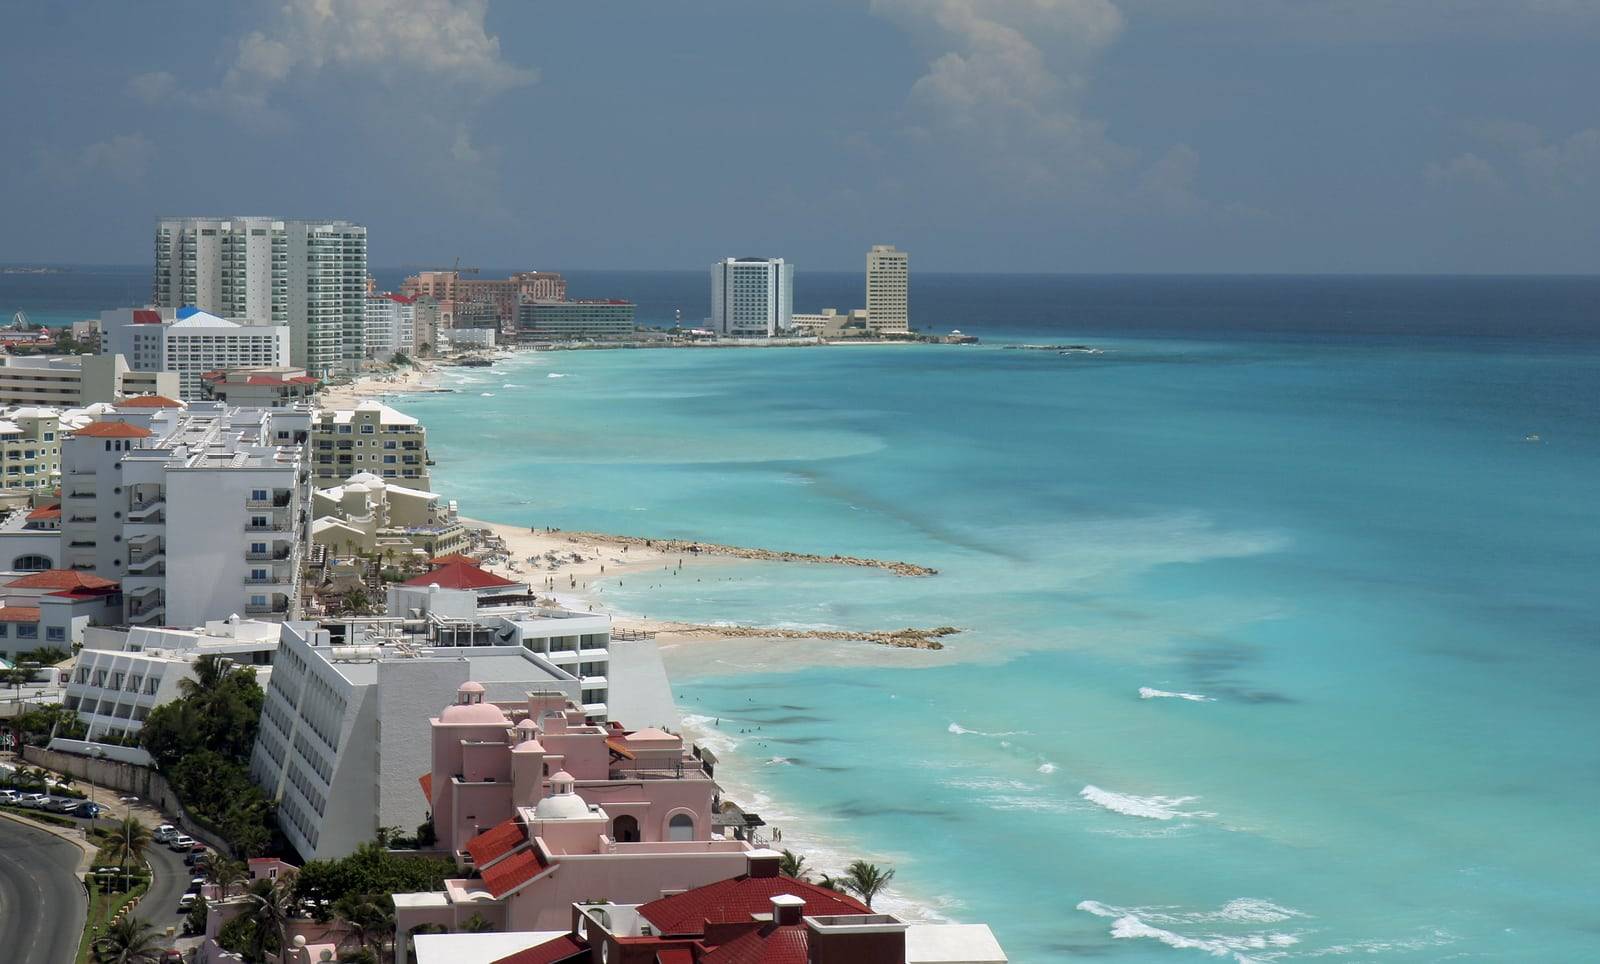 Cancun aerial view of beach and resorts